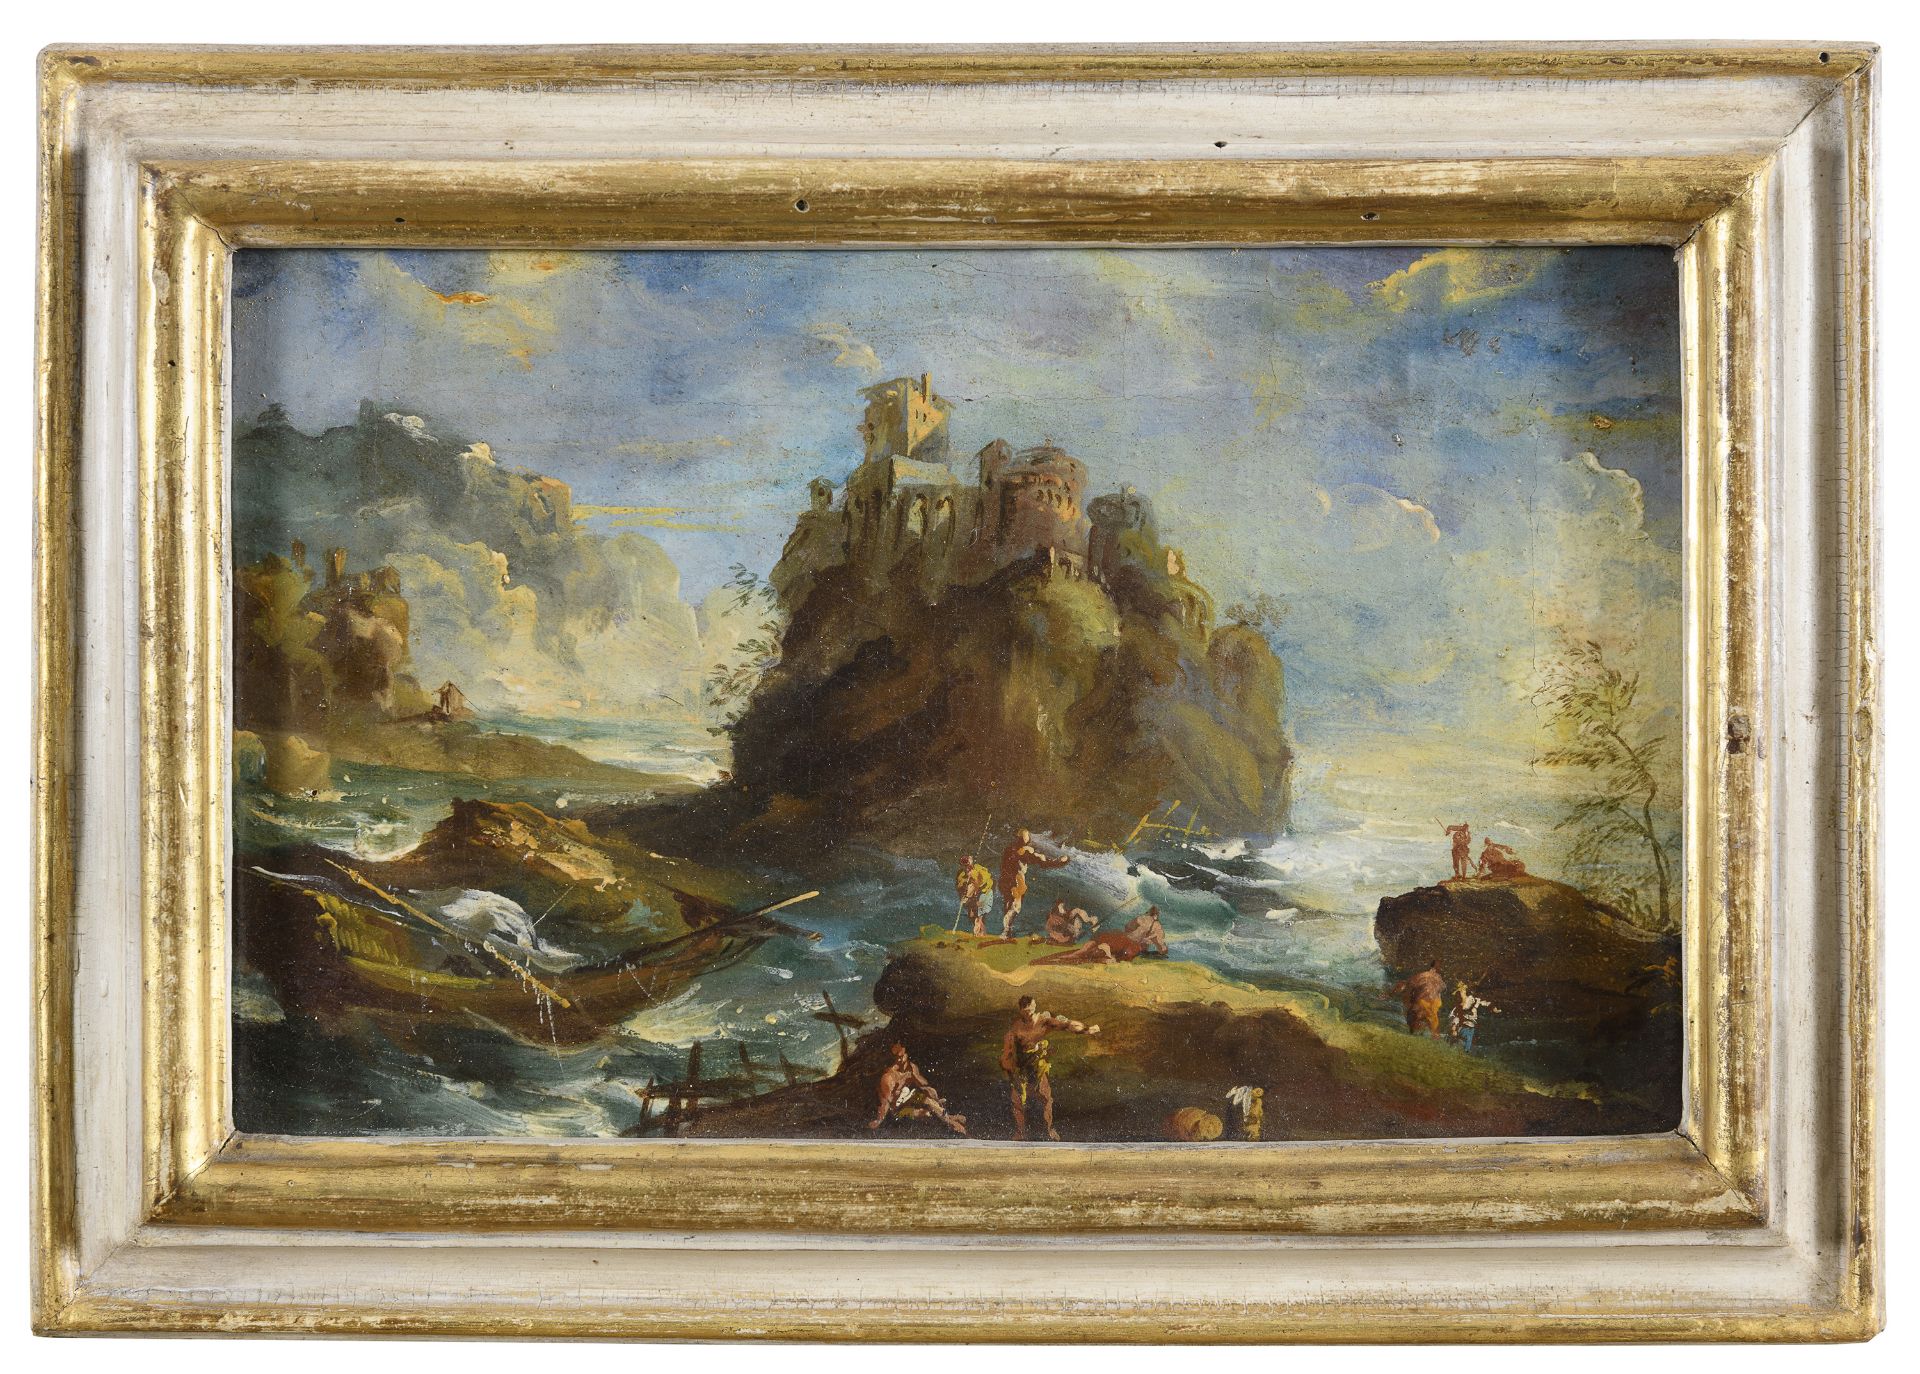 OIL PAINTING IN THE MANNER OF FRANCESCO GUARDI EARLY 20TH CENTURY